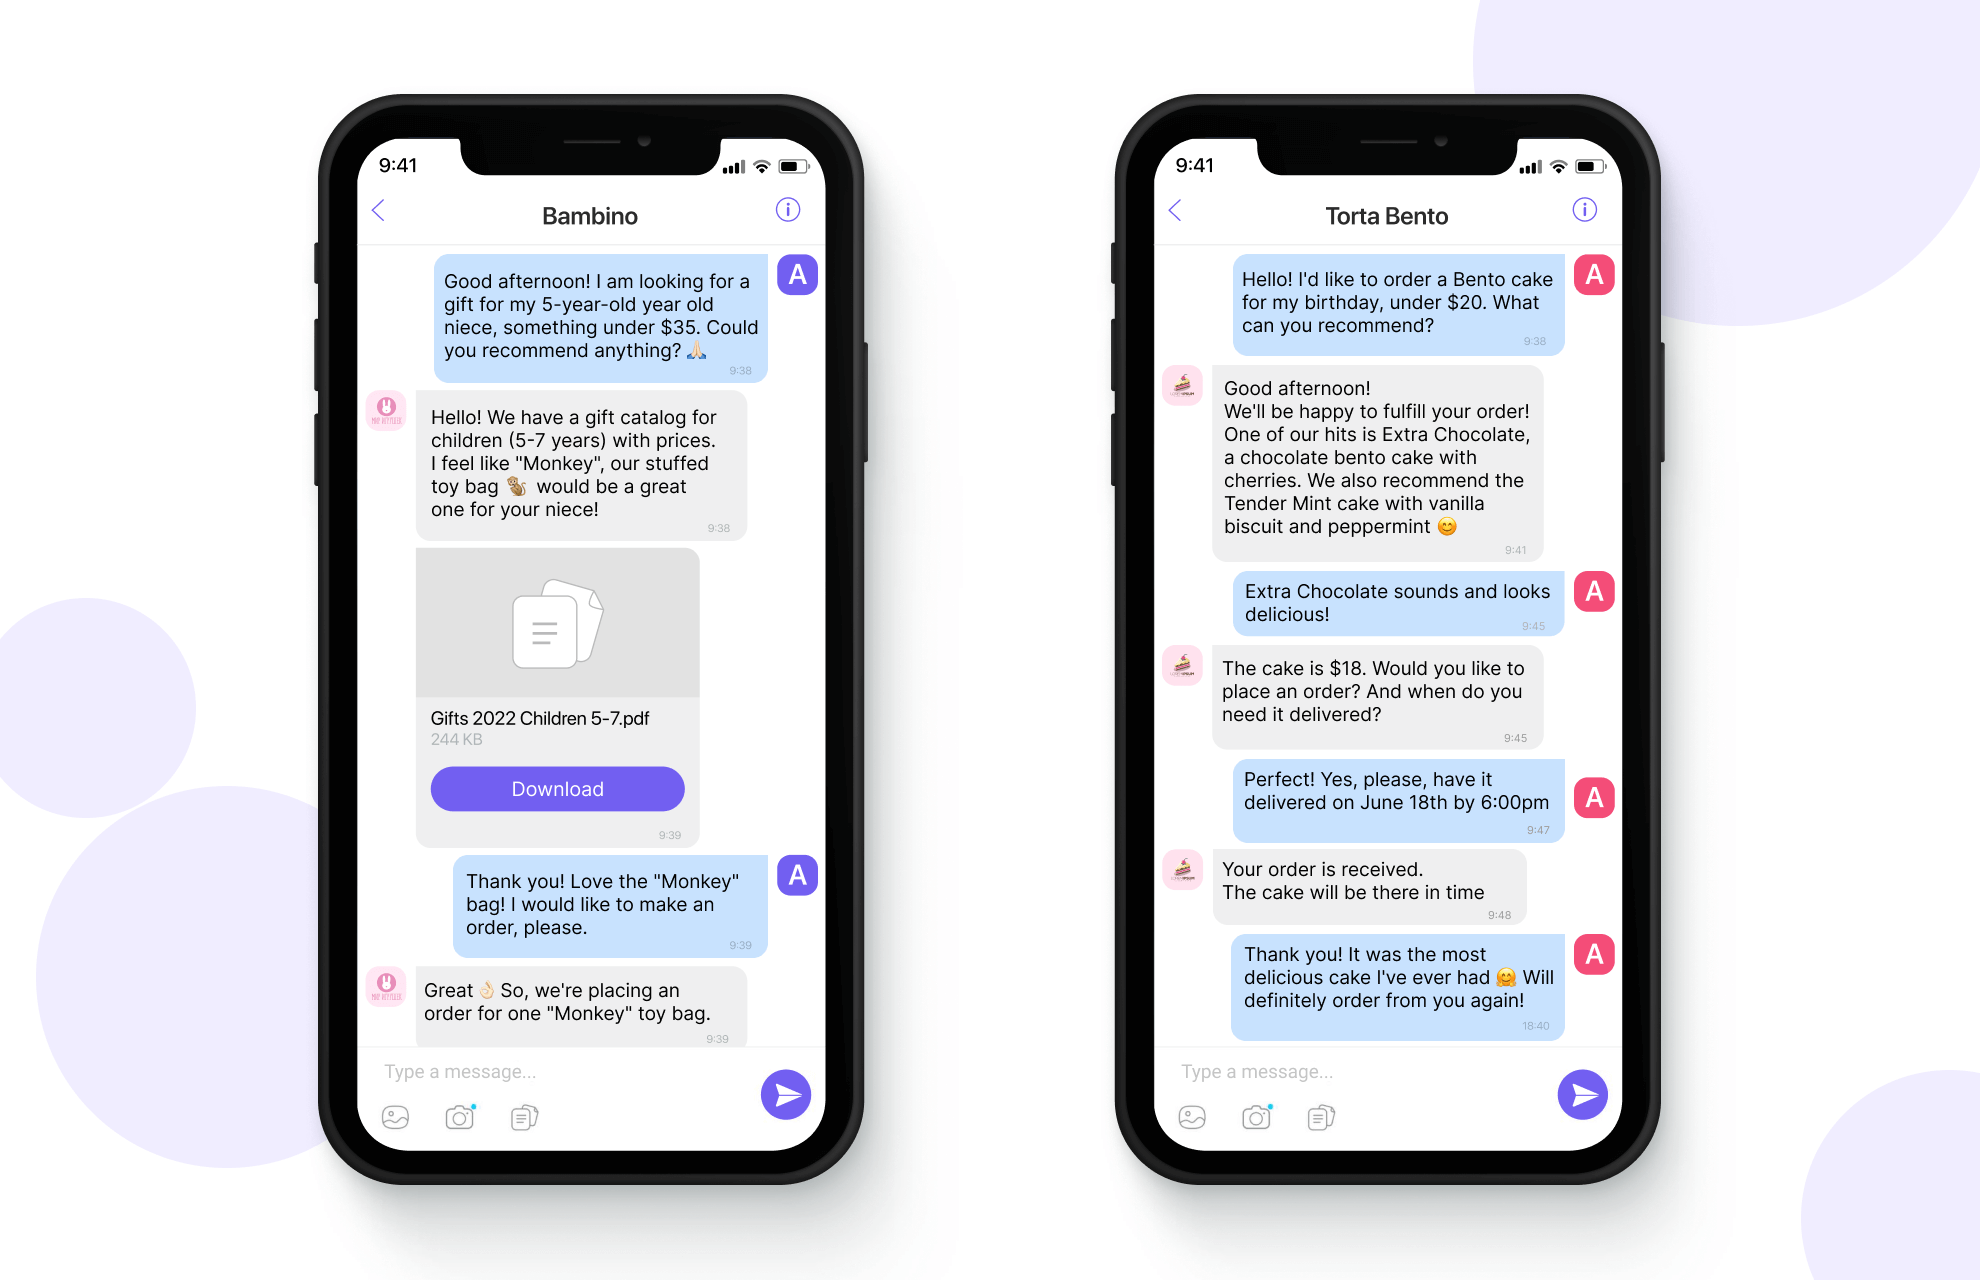 Examples of conversations in Viber Business Messages